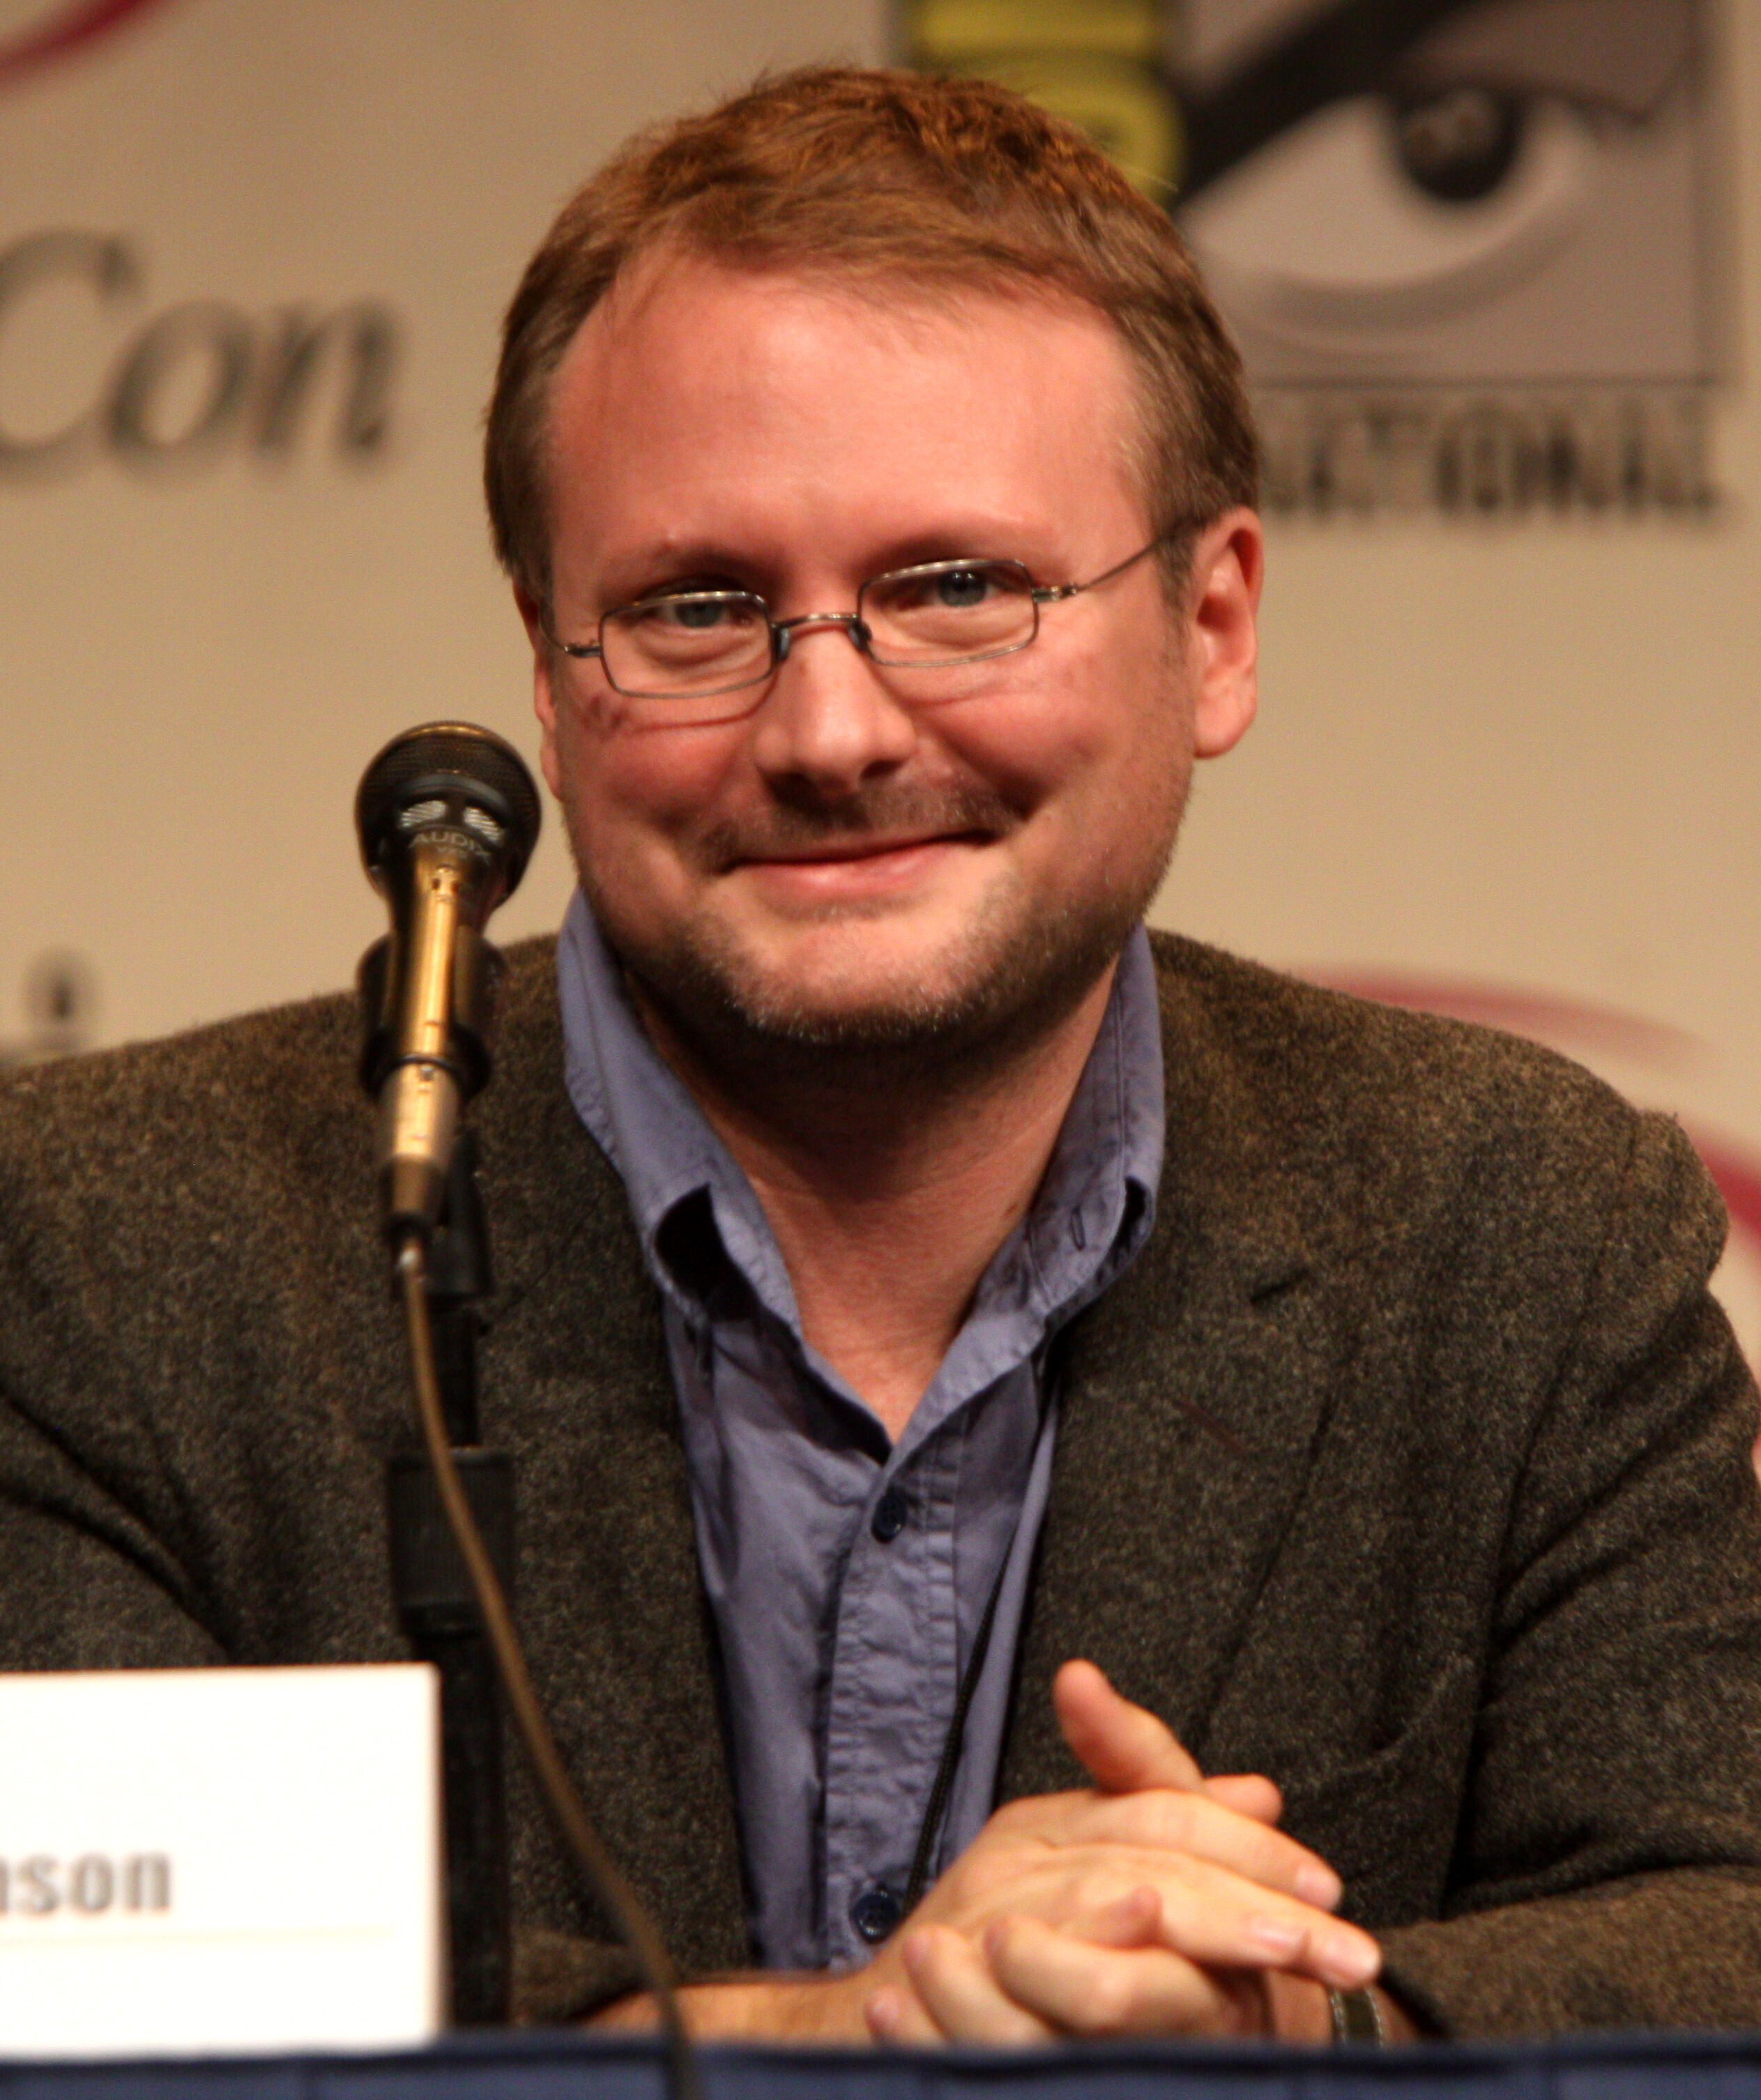 Rian Johnson Details His Journey to the Academy Awards